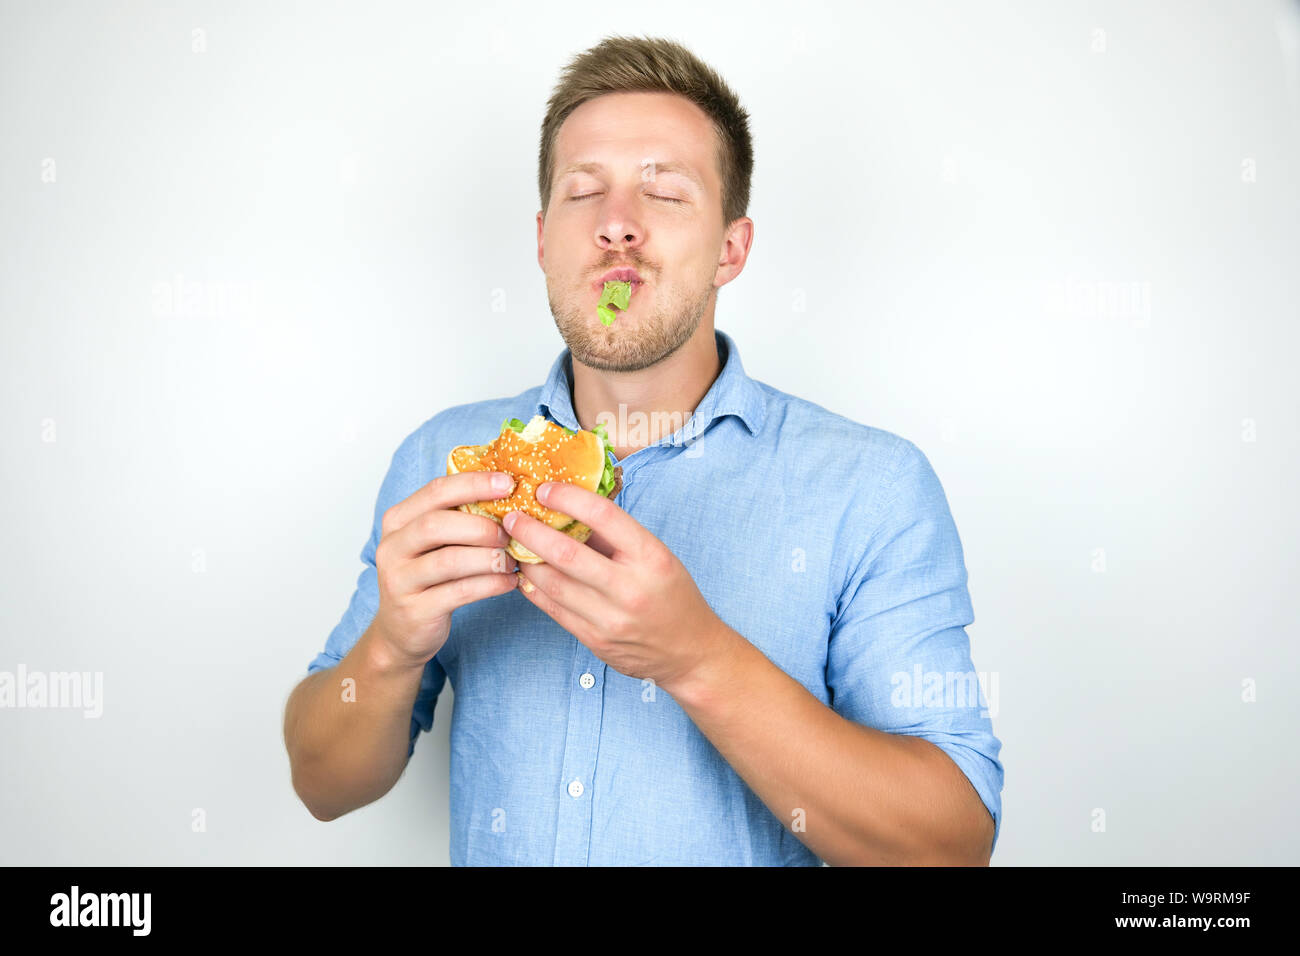 young funny man biting cheeseburger from fast food restaurant standing with salad leaf in his mouth on isolated white background. Stock Photo